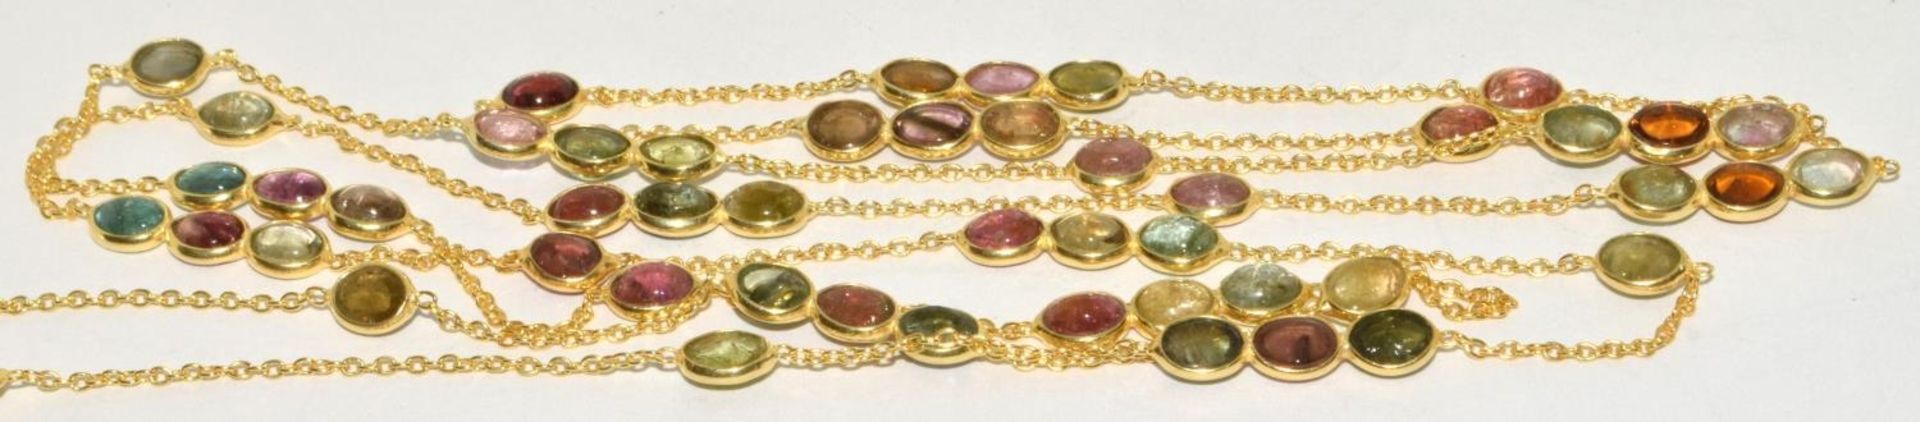 cabochon pink and green natural tourmaline gold on silver on long chain. - Image 4 of 4